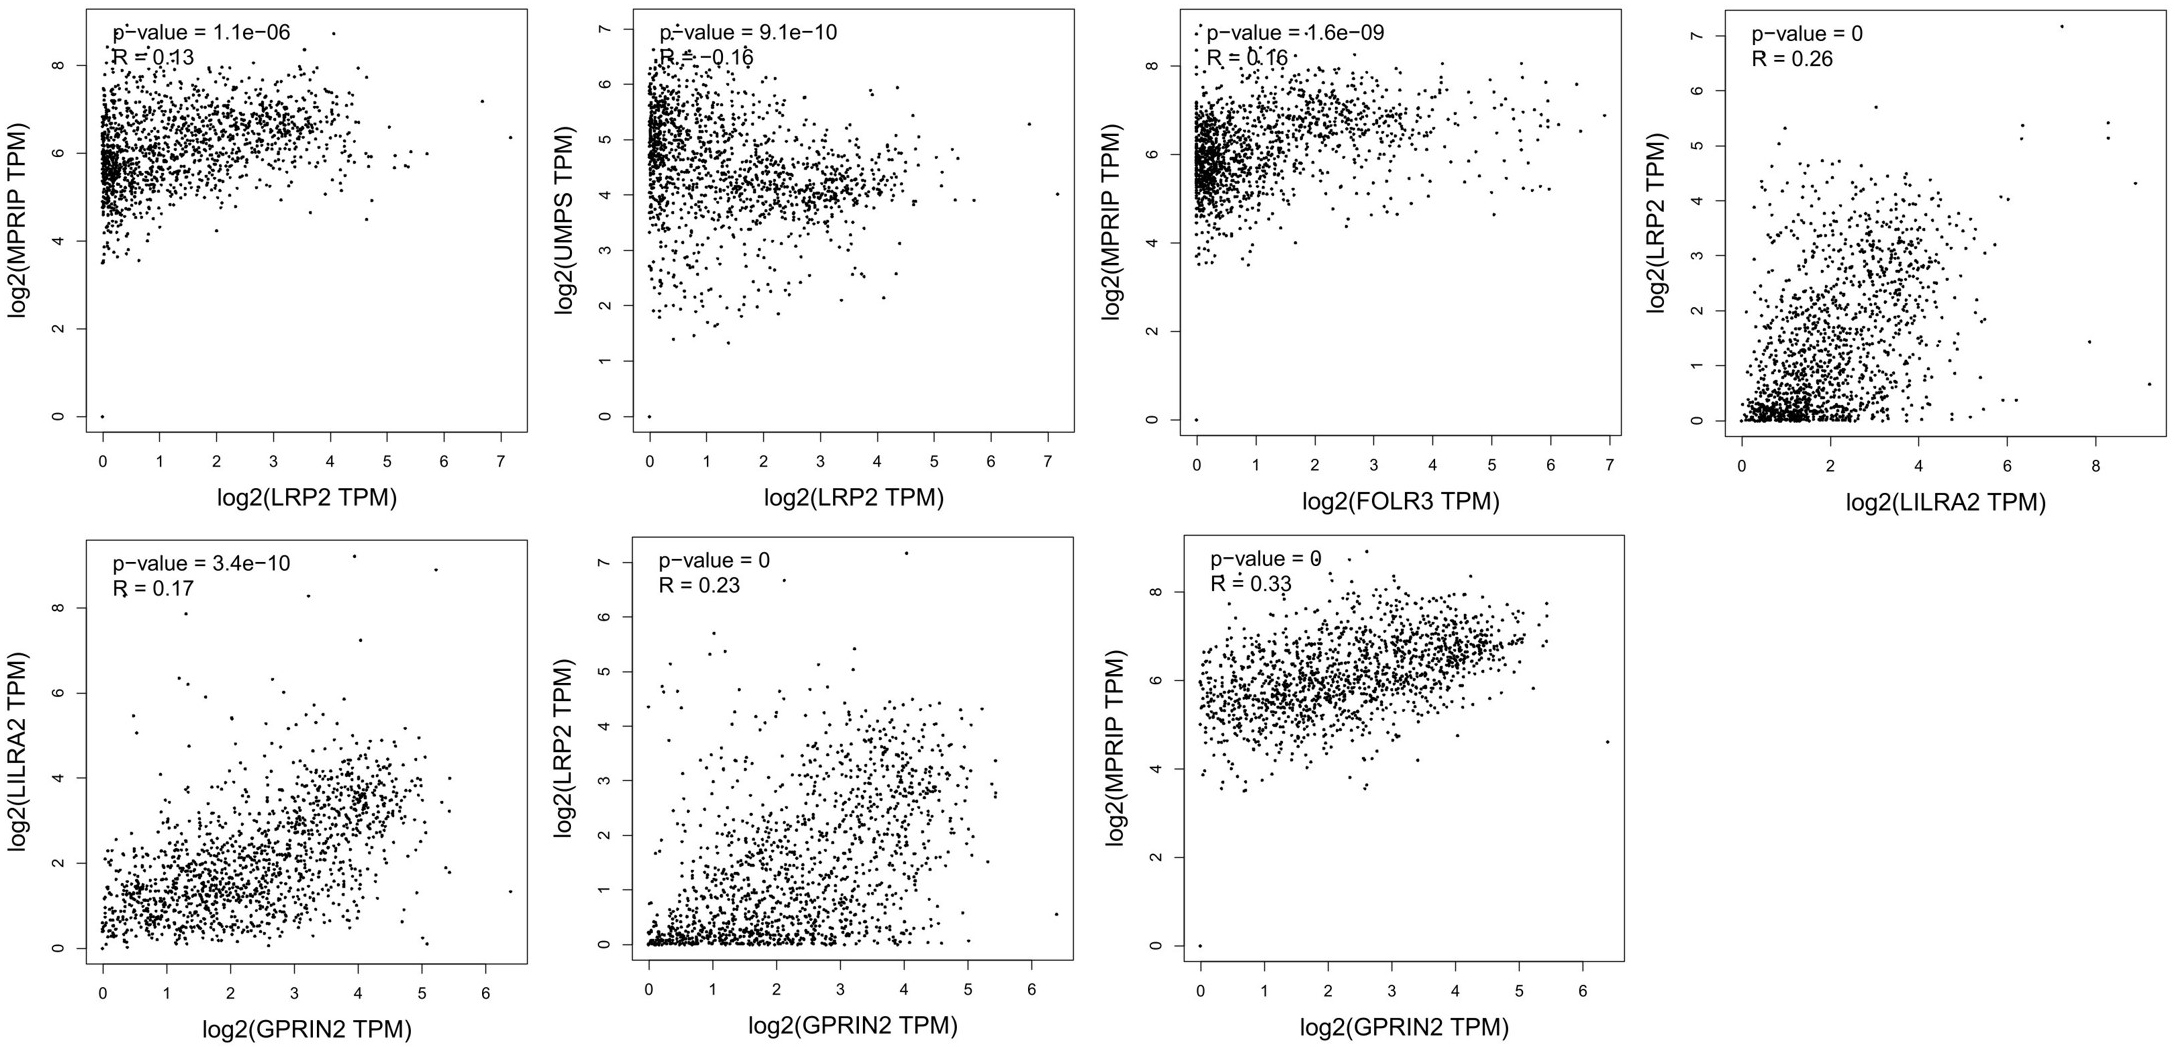 Correlation analysis of potential key genes in NSLCL. TCGA and/or GTEx expression data show significant correlations between LRP2, FOLR3, LILRA2, and GPRIN2.